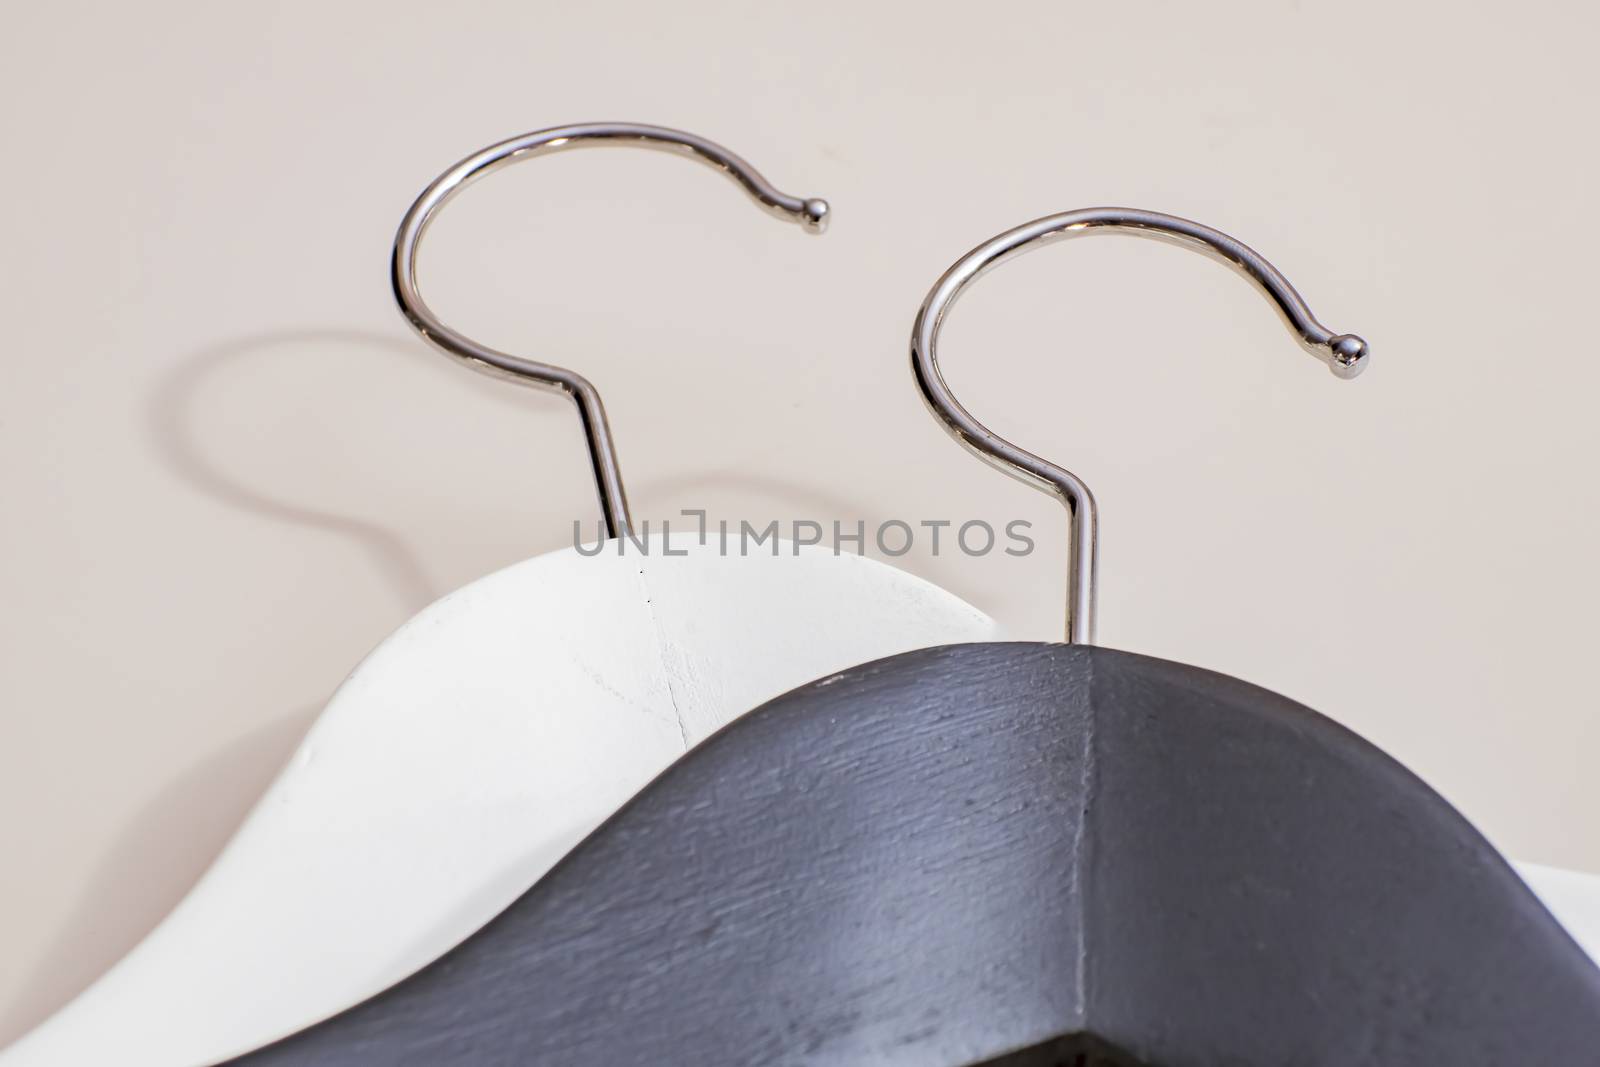 black and white wooden hangers